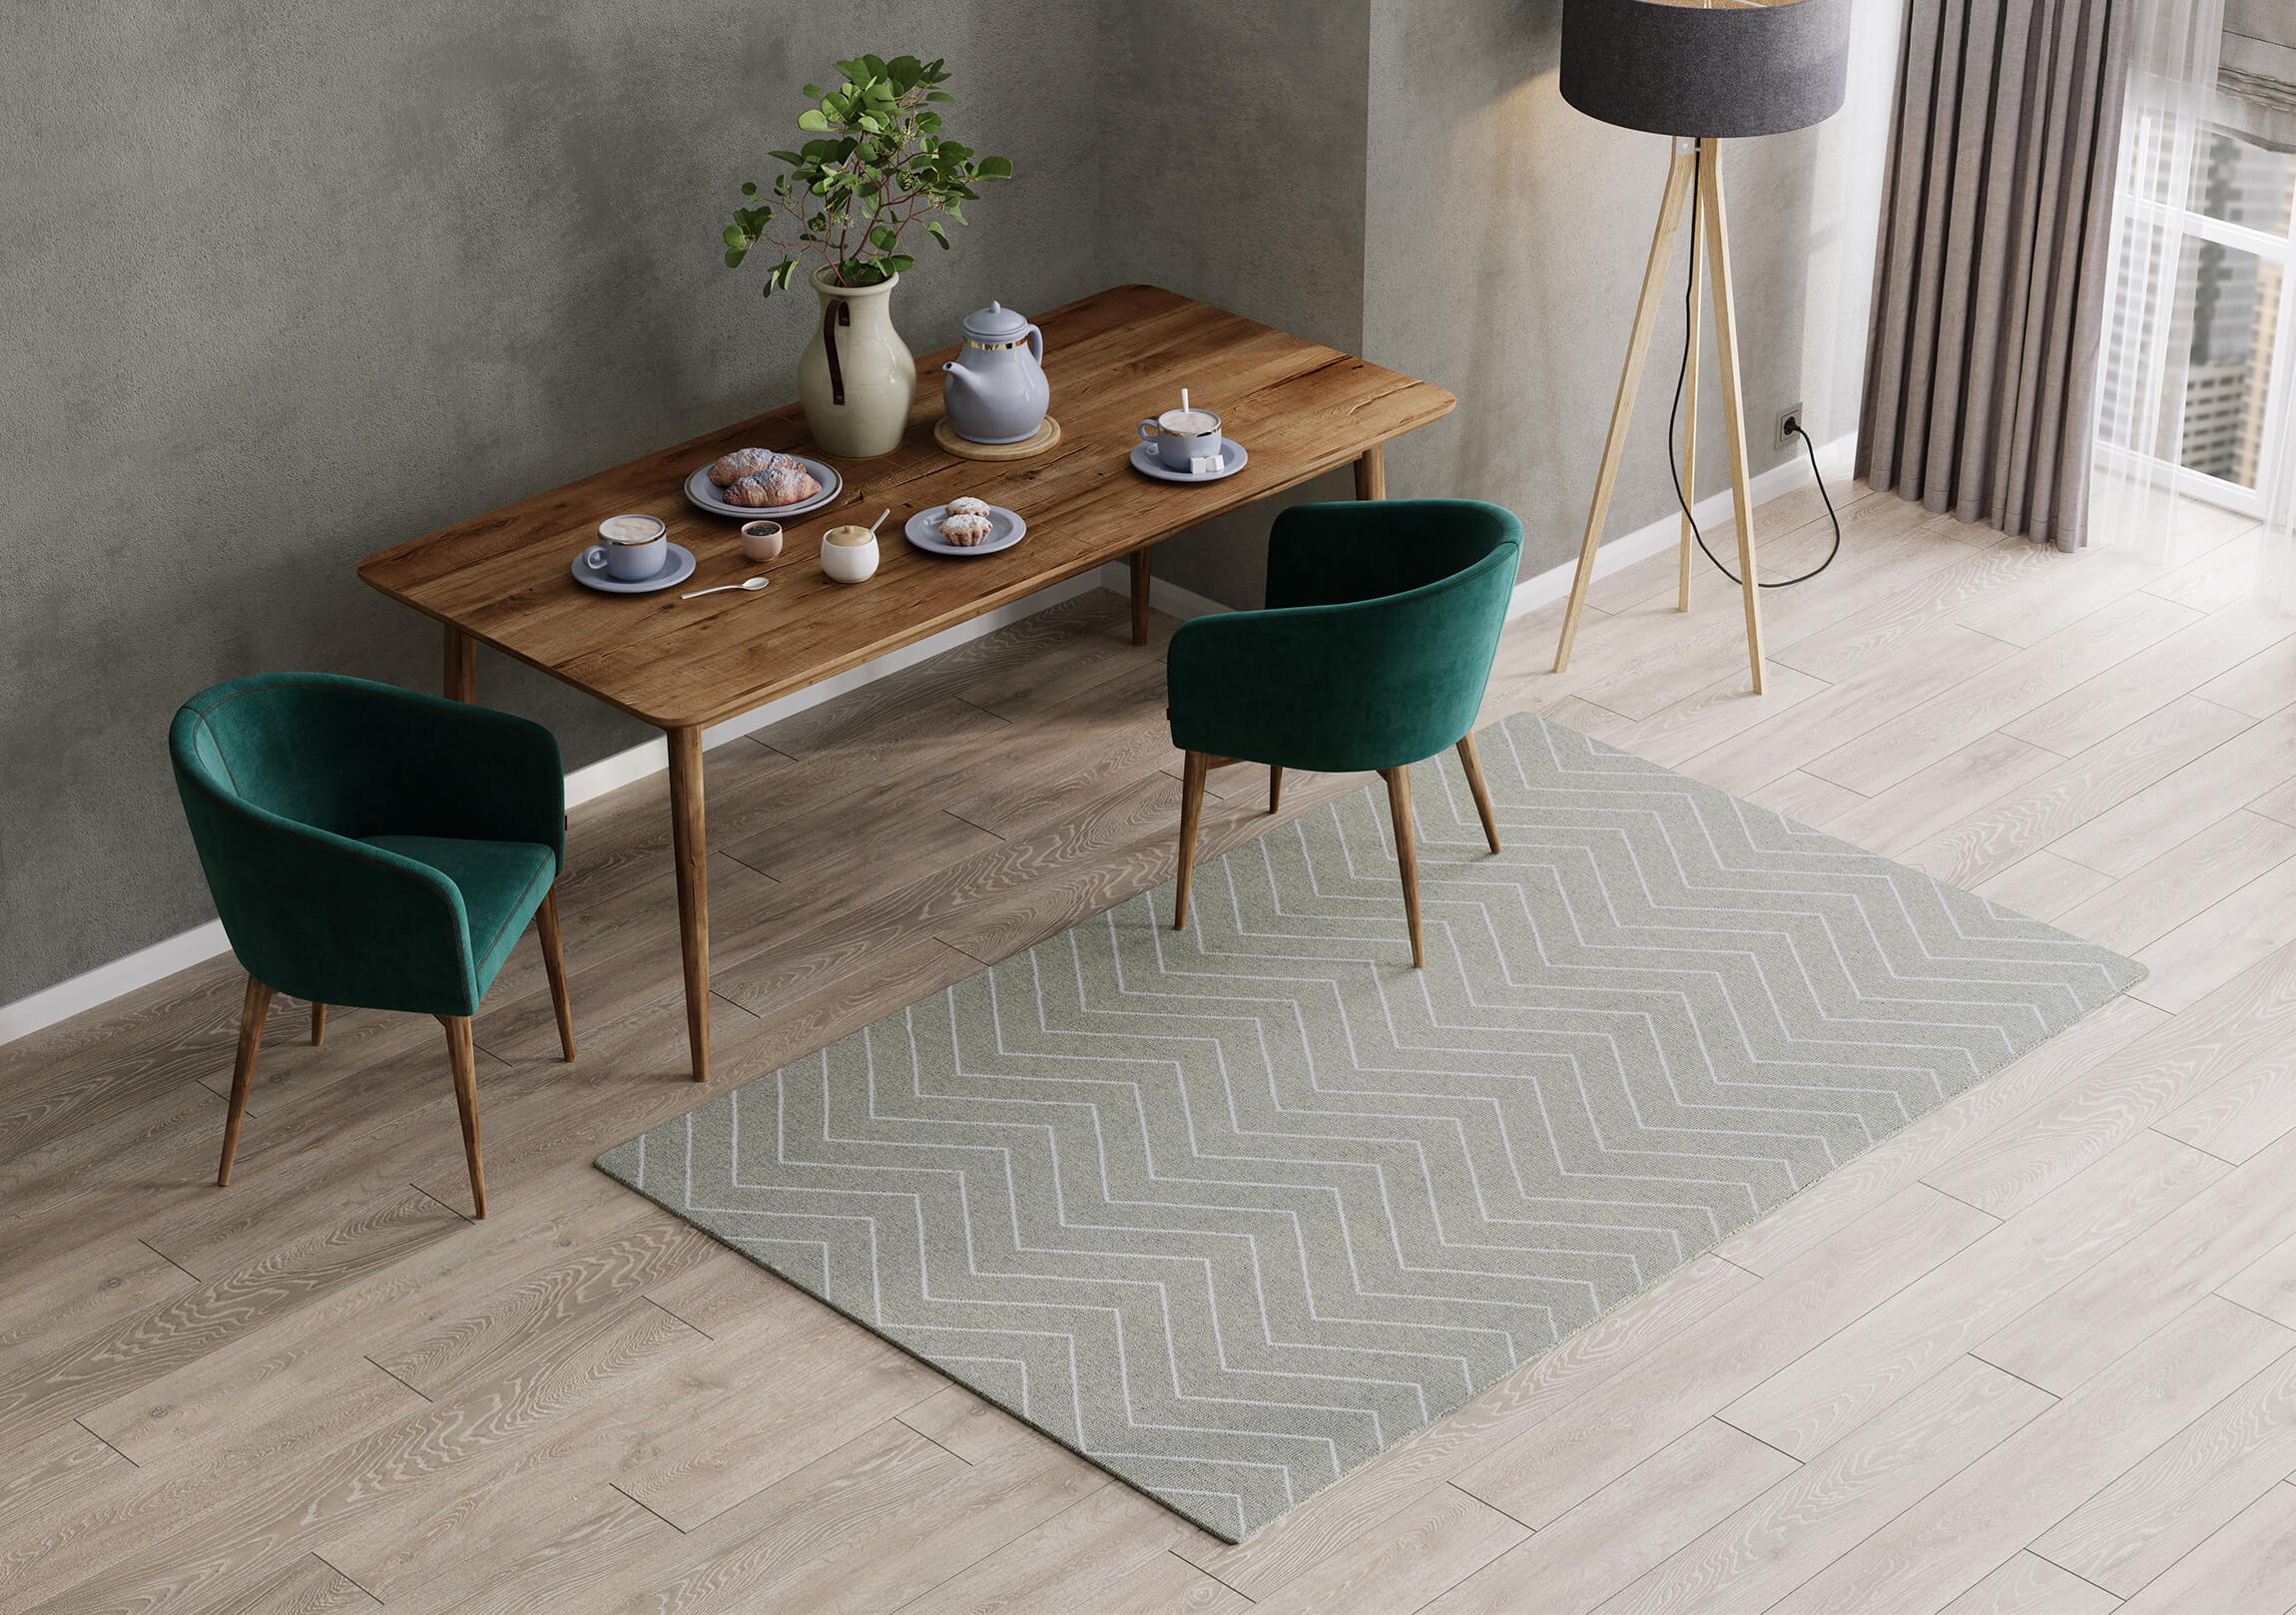 Lifestyle Visualization of a Dining Room Rug